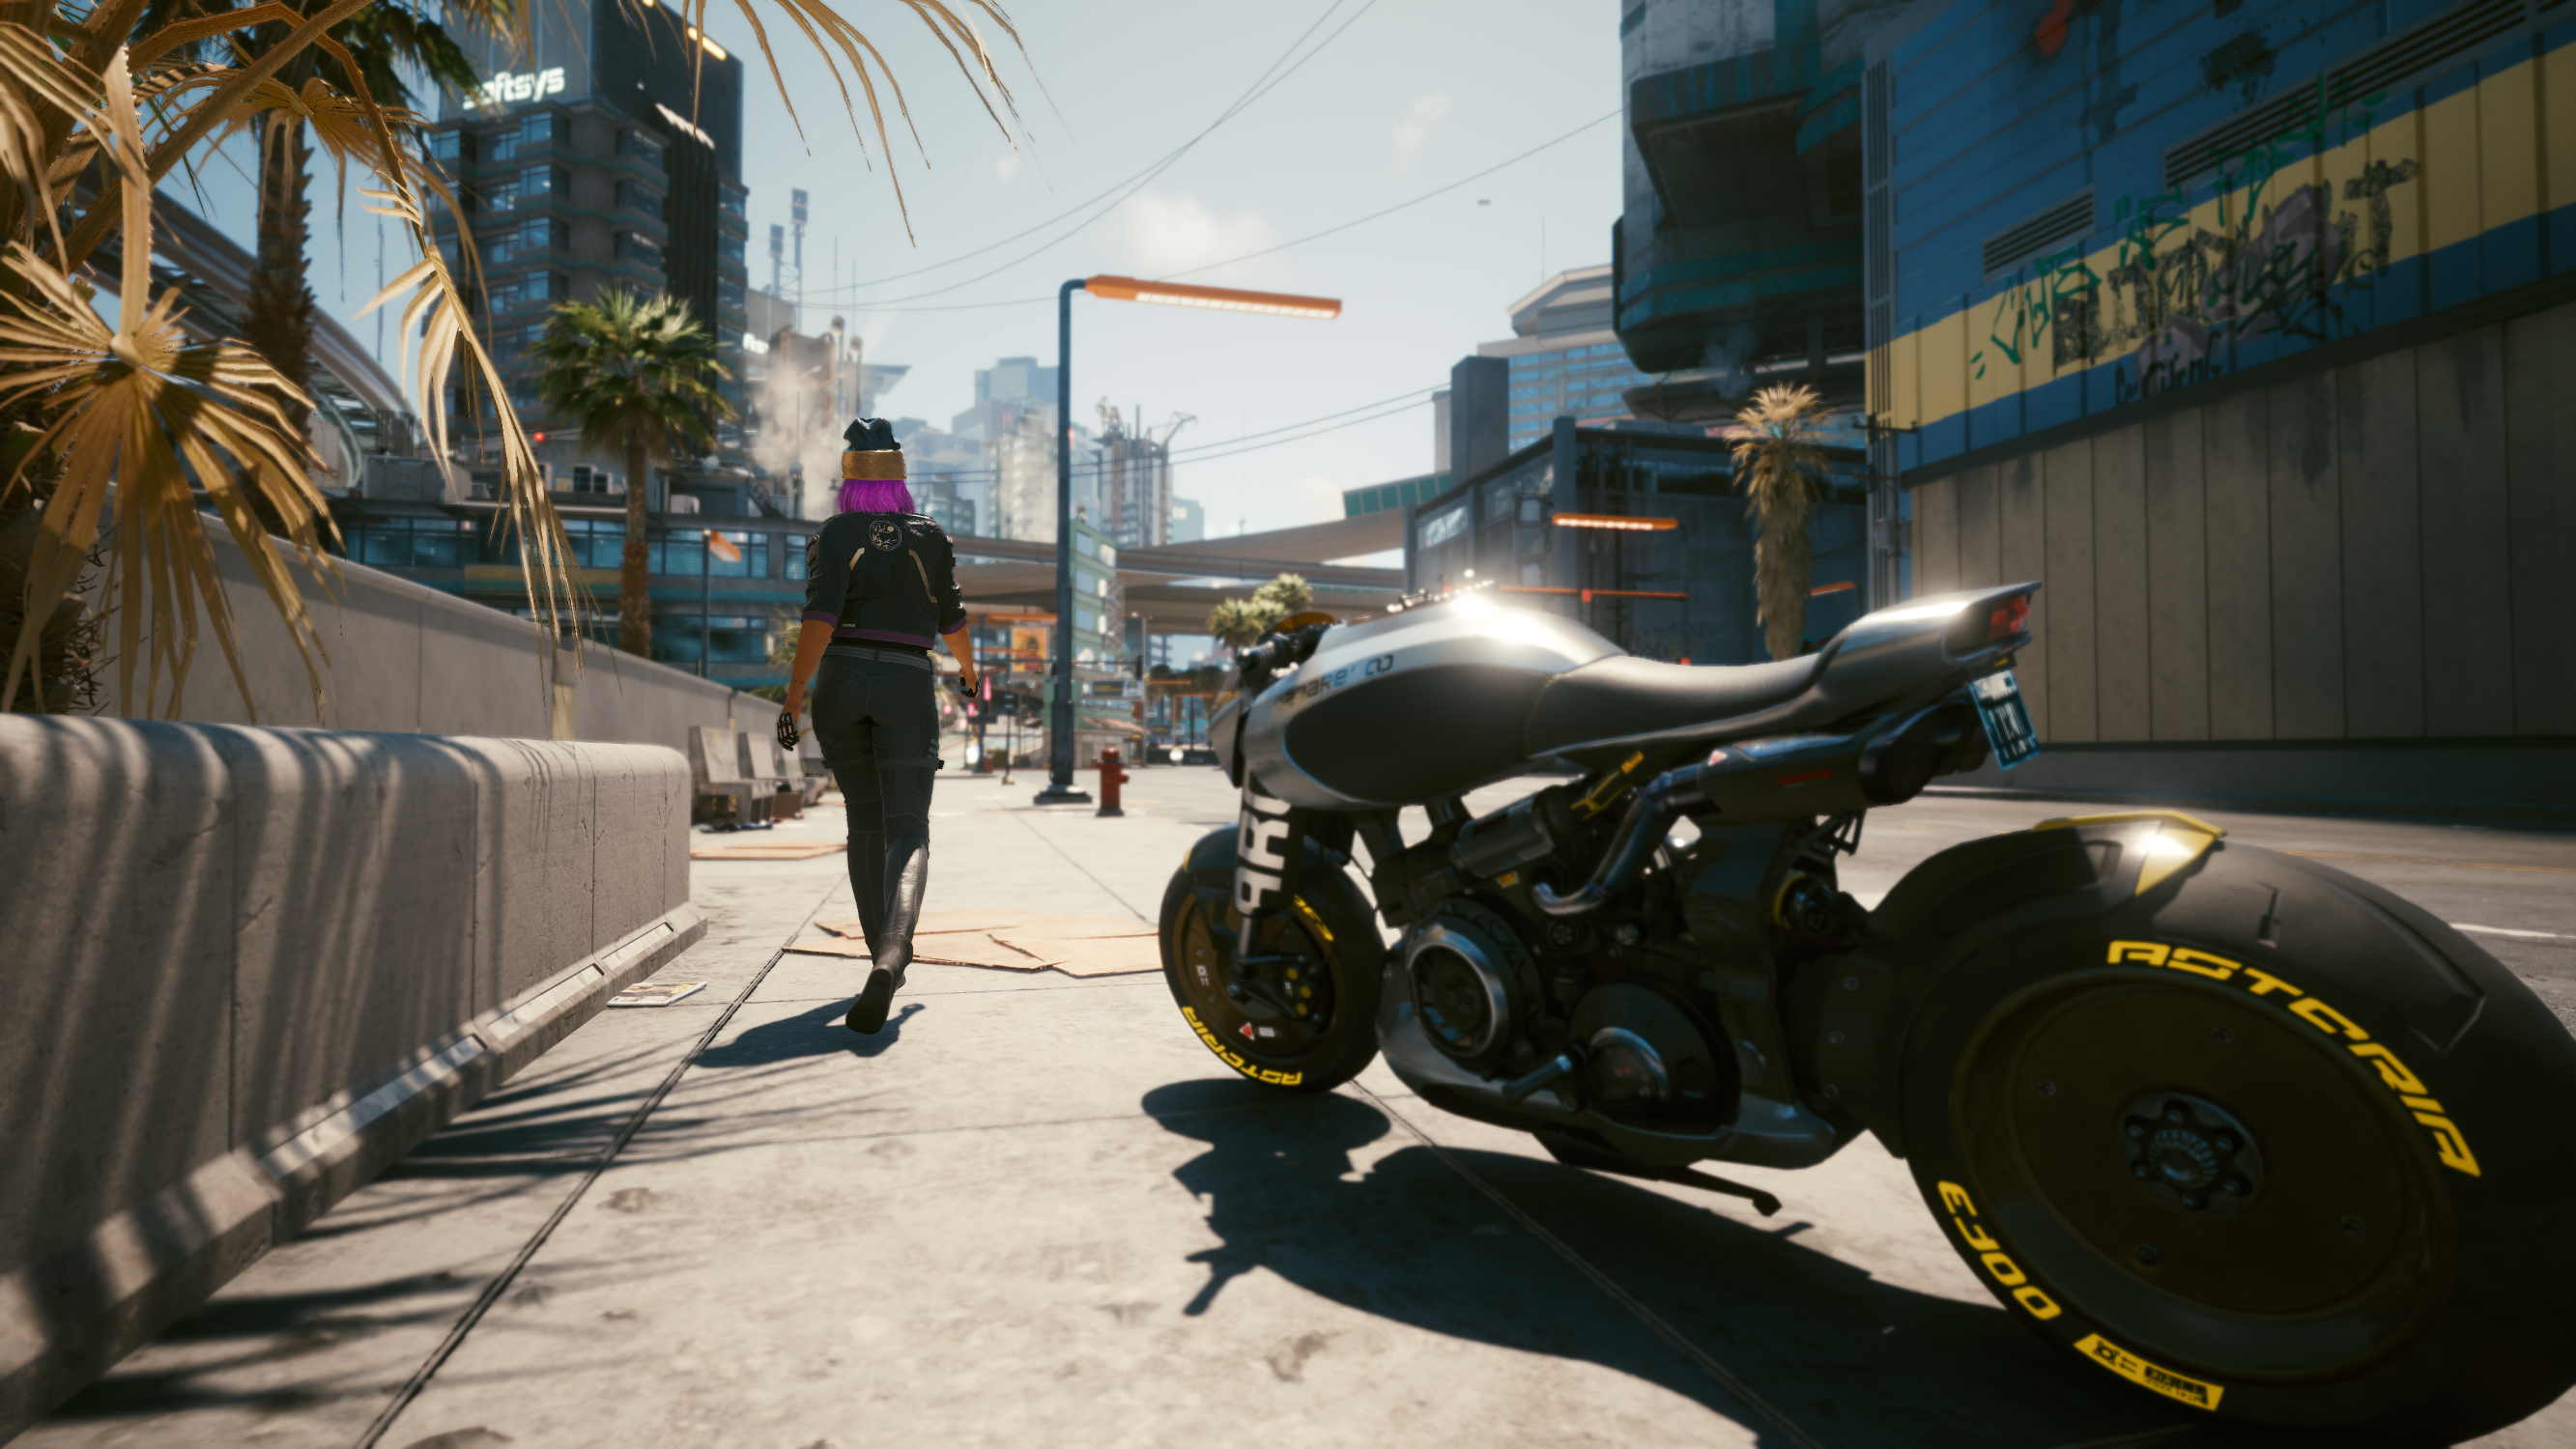 Screenshot of the game Cyberpunk 2077 showing the main character walking away from the camera with their motorcycle in the foreground and the city in the background.